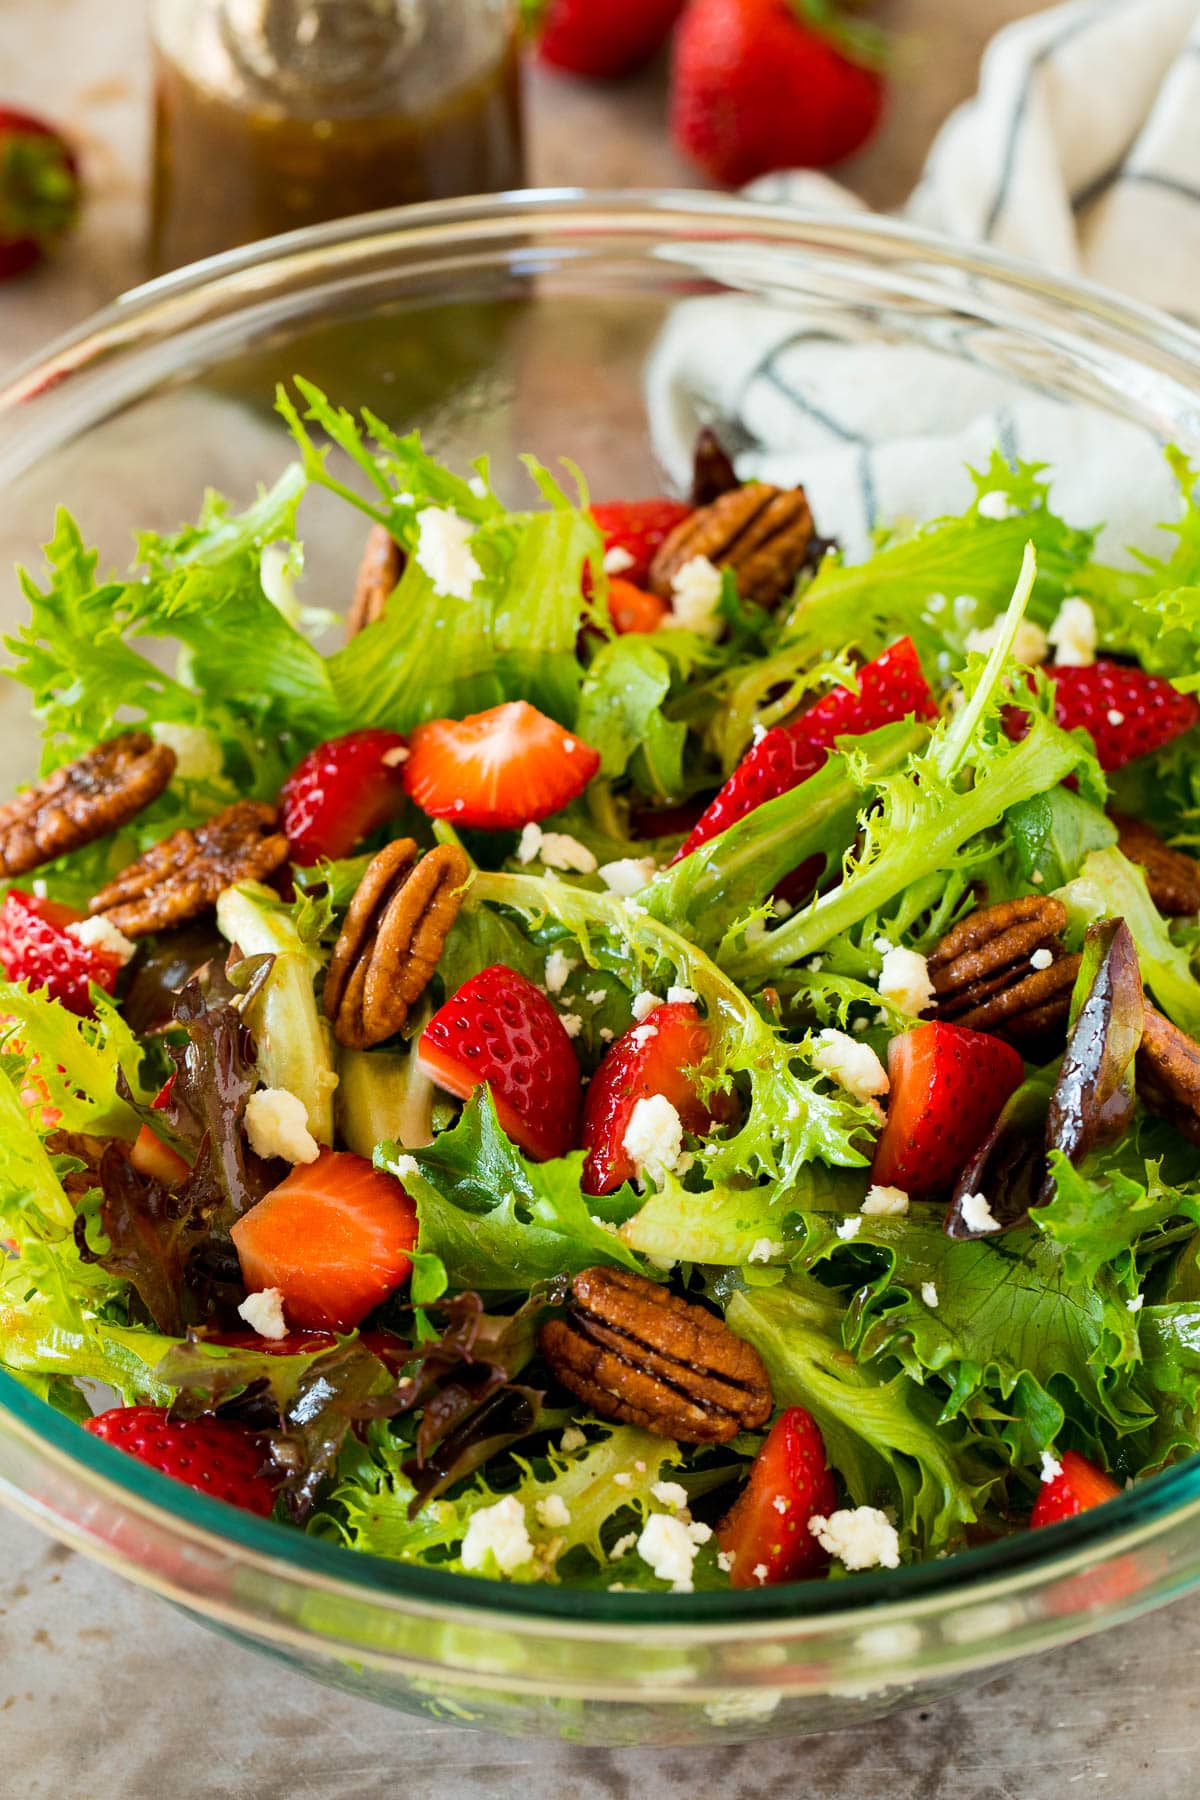 A salad made with balsamic vinaigrette and strawberries.